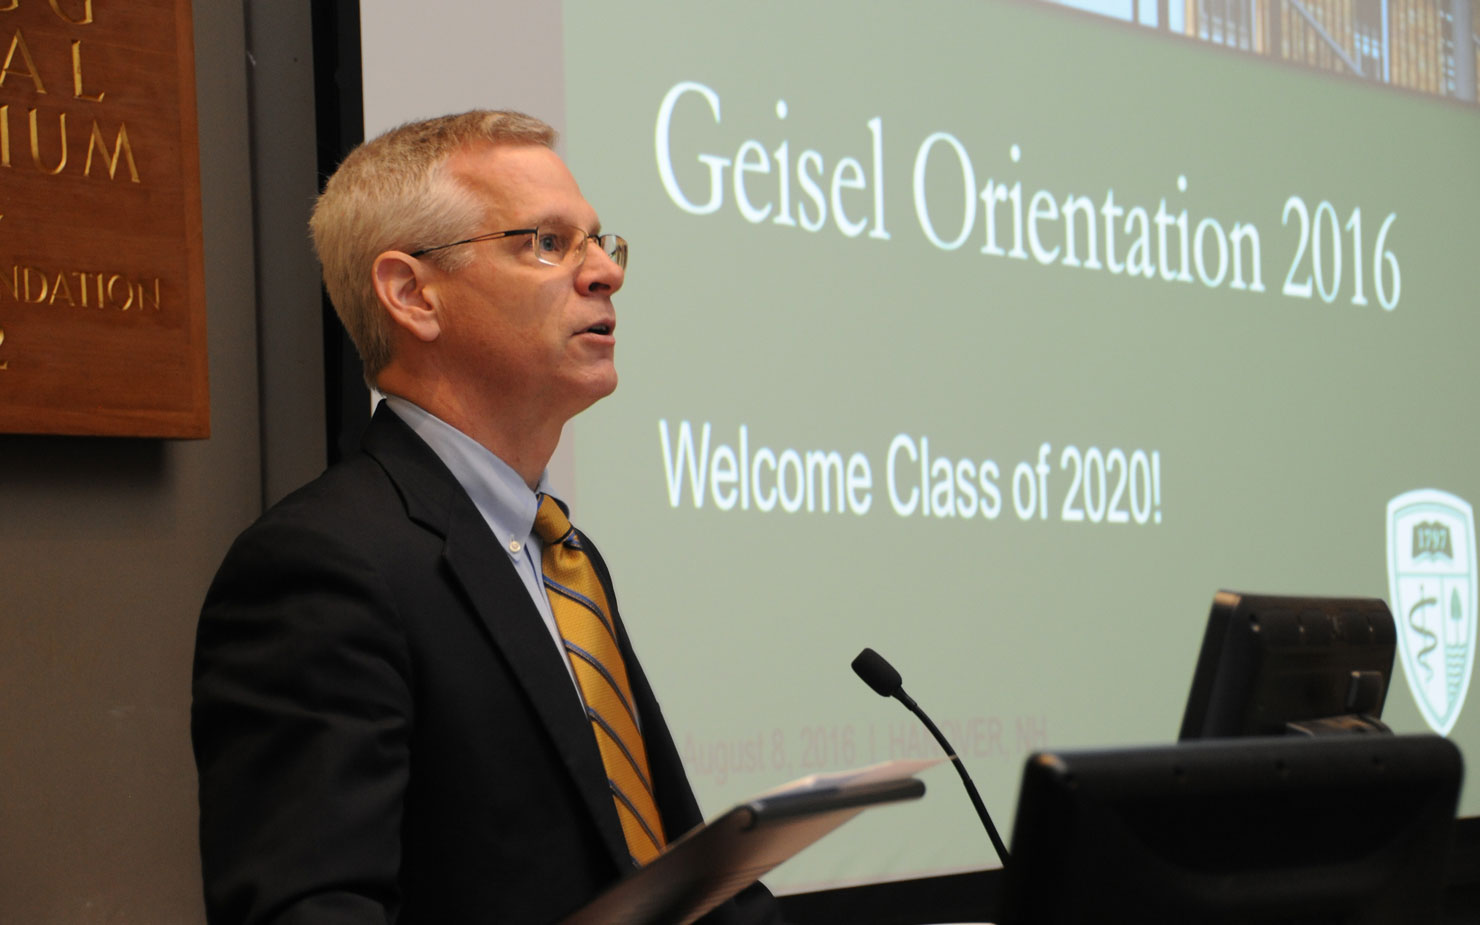 Interim Dean Duane Compton welcomes the Class of 2020 to Year 1 Orientation. (Photo by John Gilbert Fox)